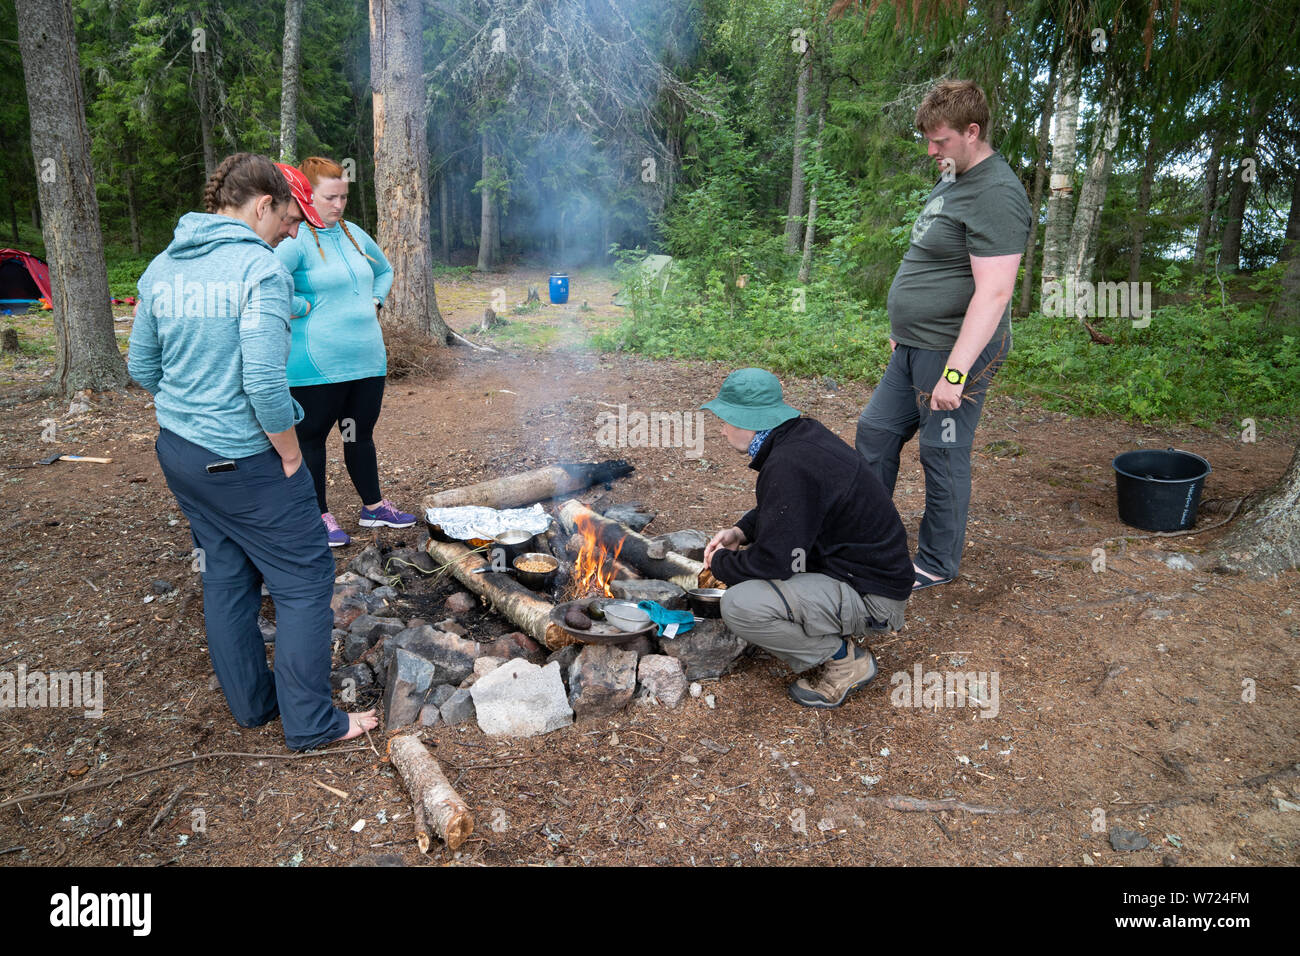 Friends wild camping in a forest. Four people around a camp fire. Stock Photo